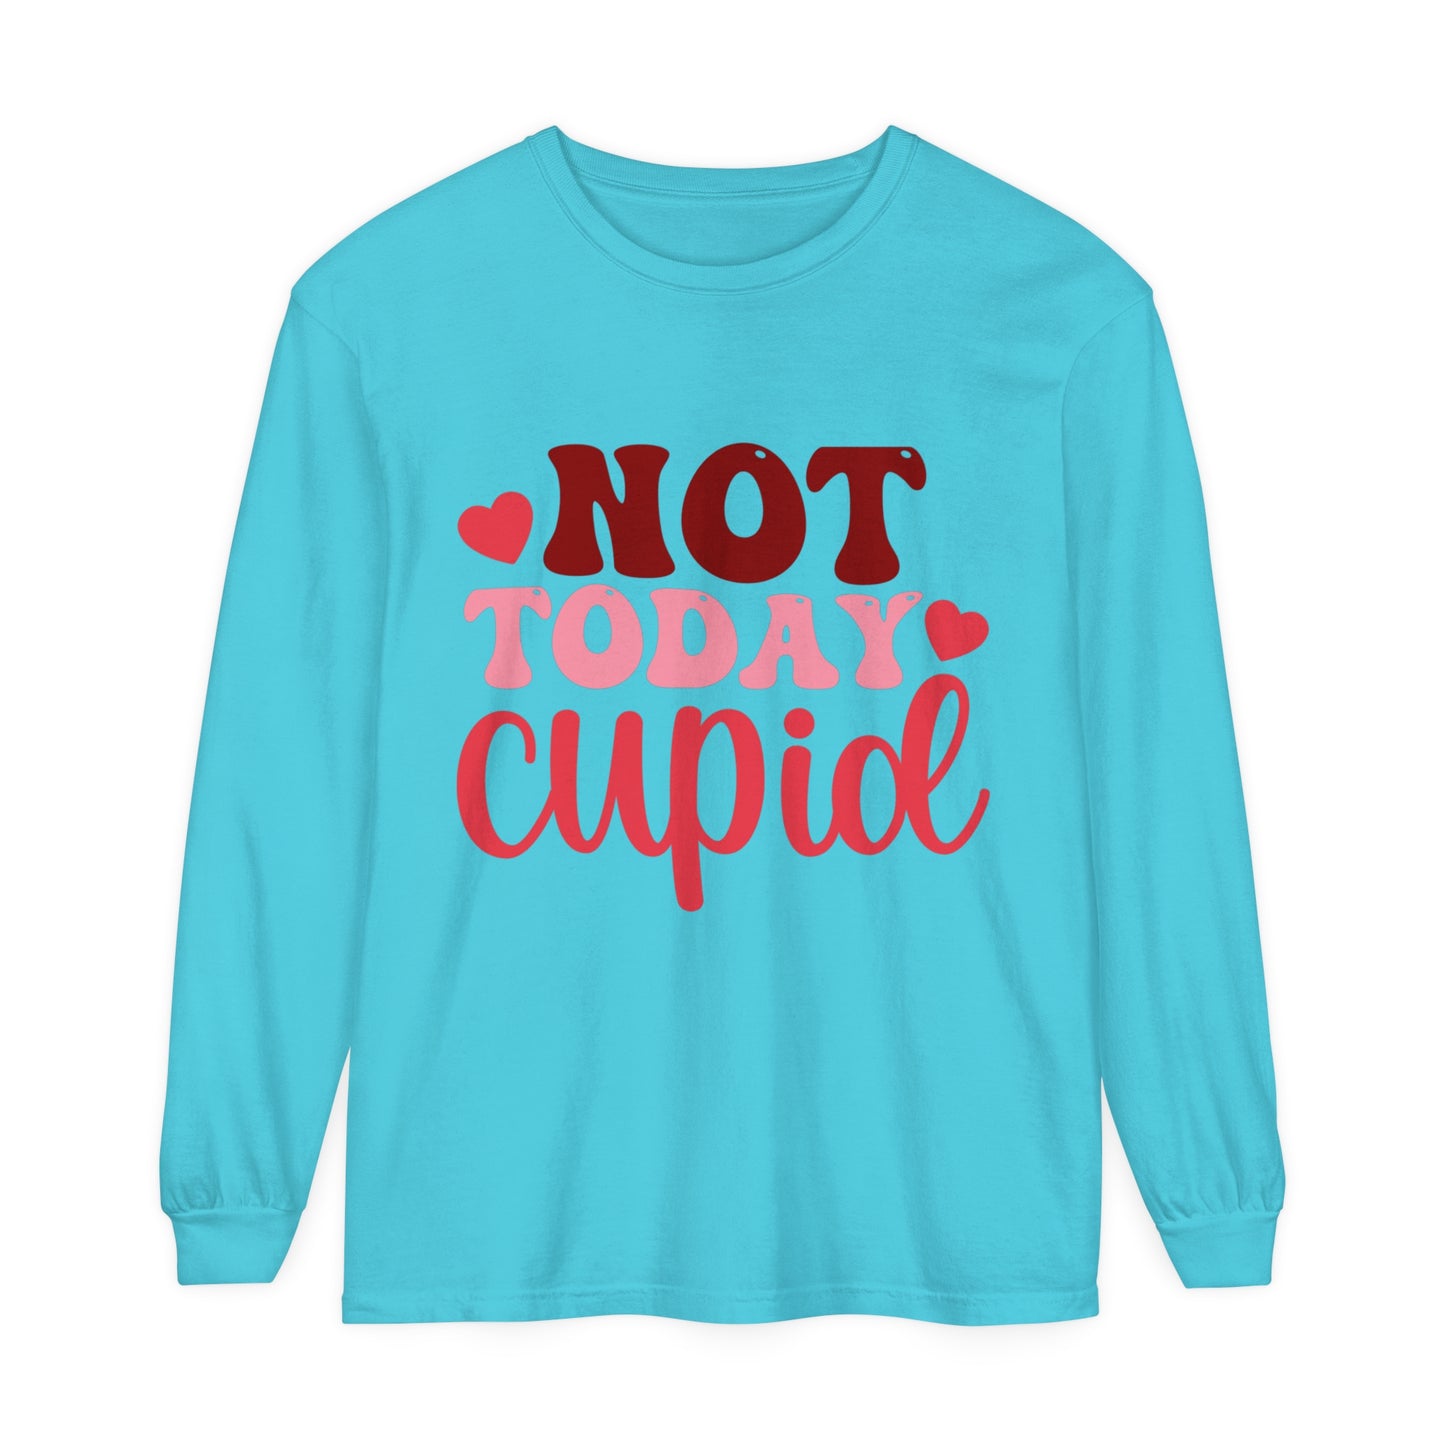 Not Today Cupid Women's Loose Long Sleeve T-Shirt